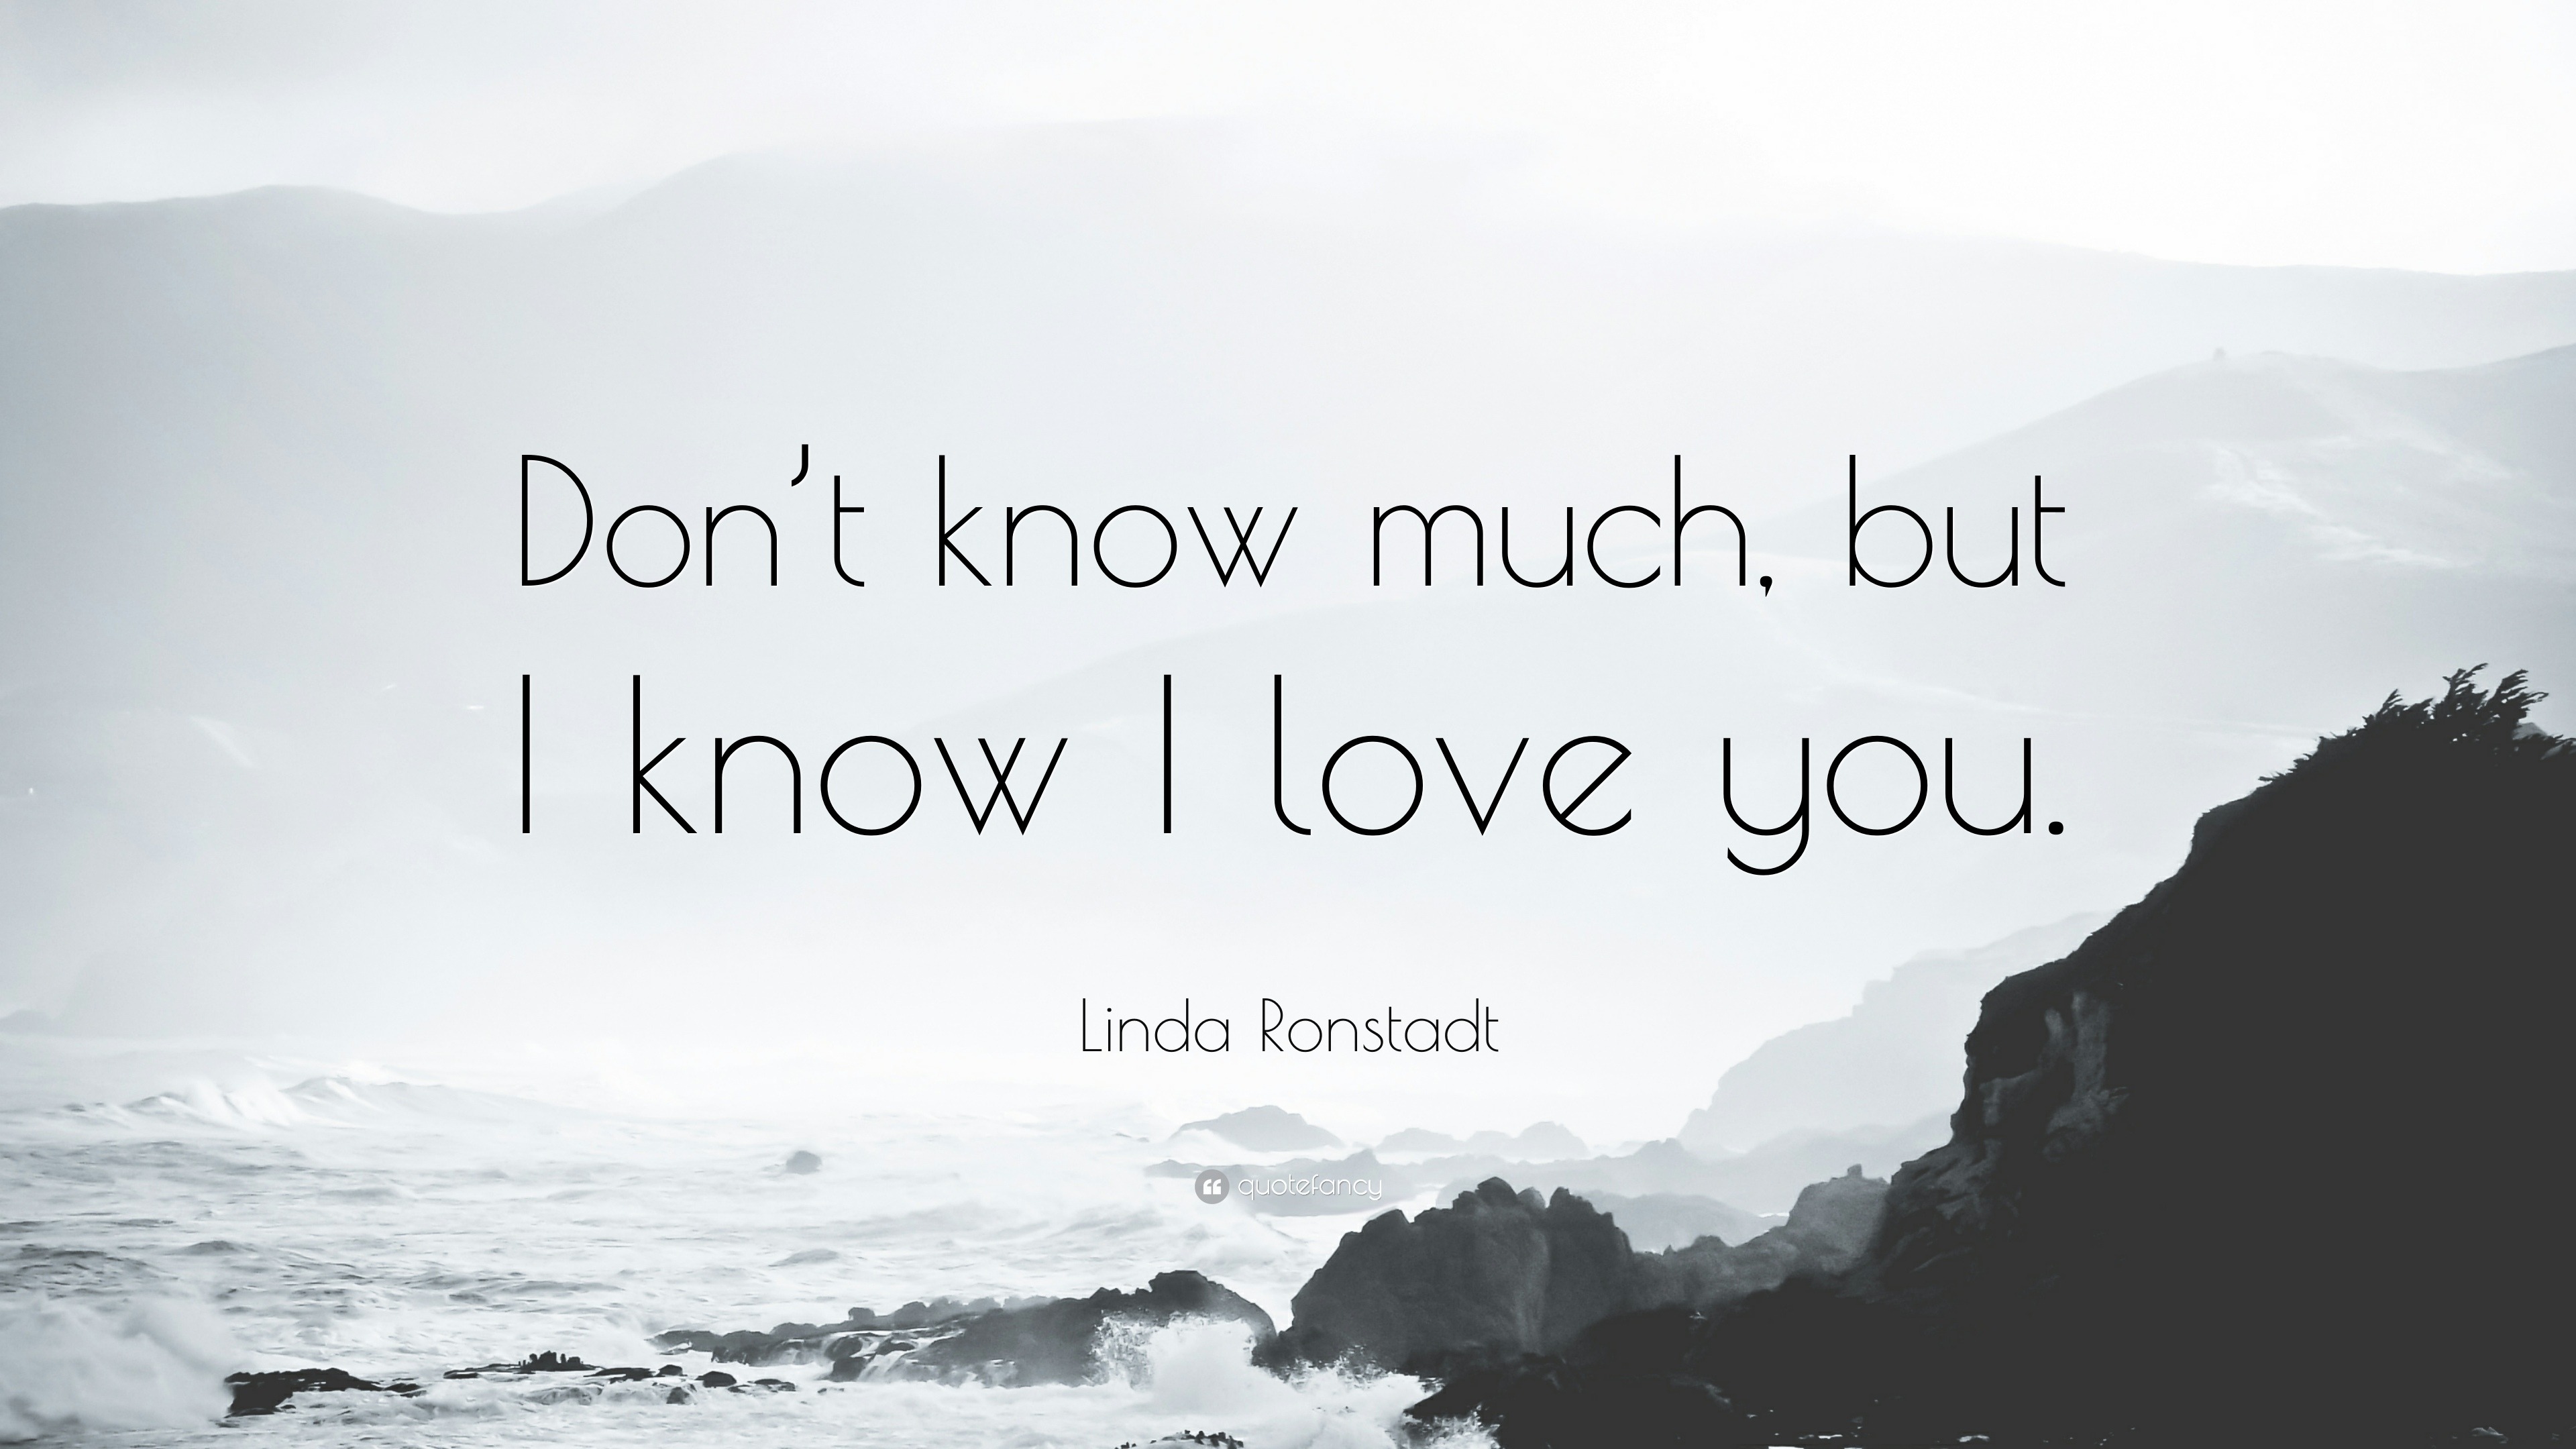 Linda Ronstadt Quote Don T Know Much But I Know I Love You